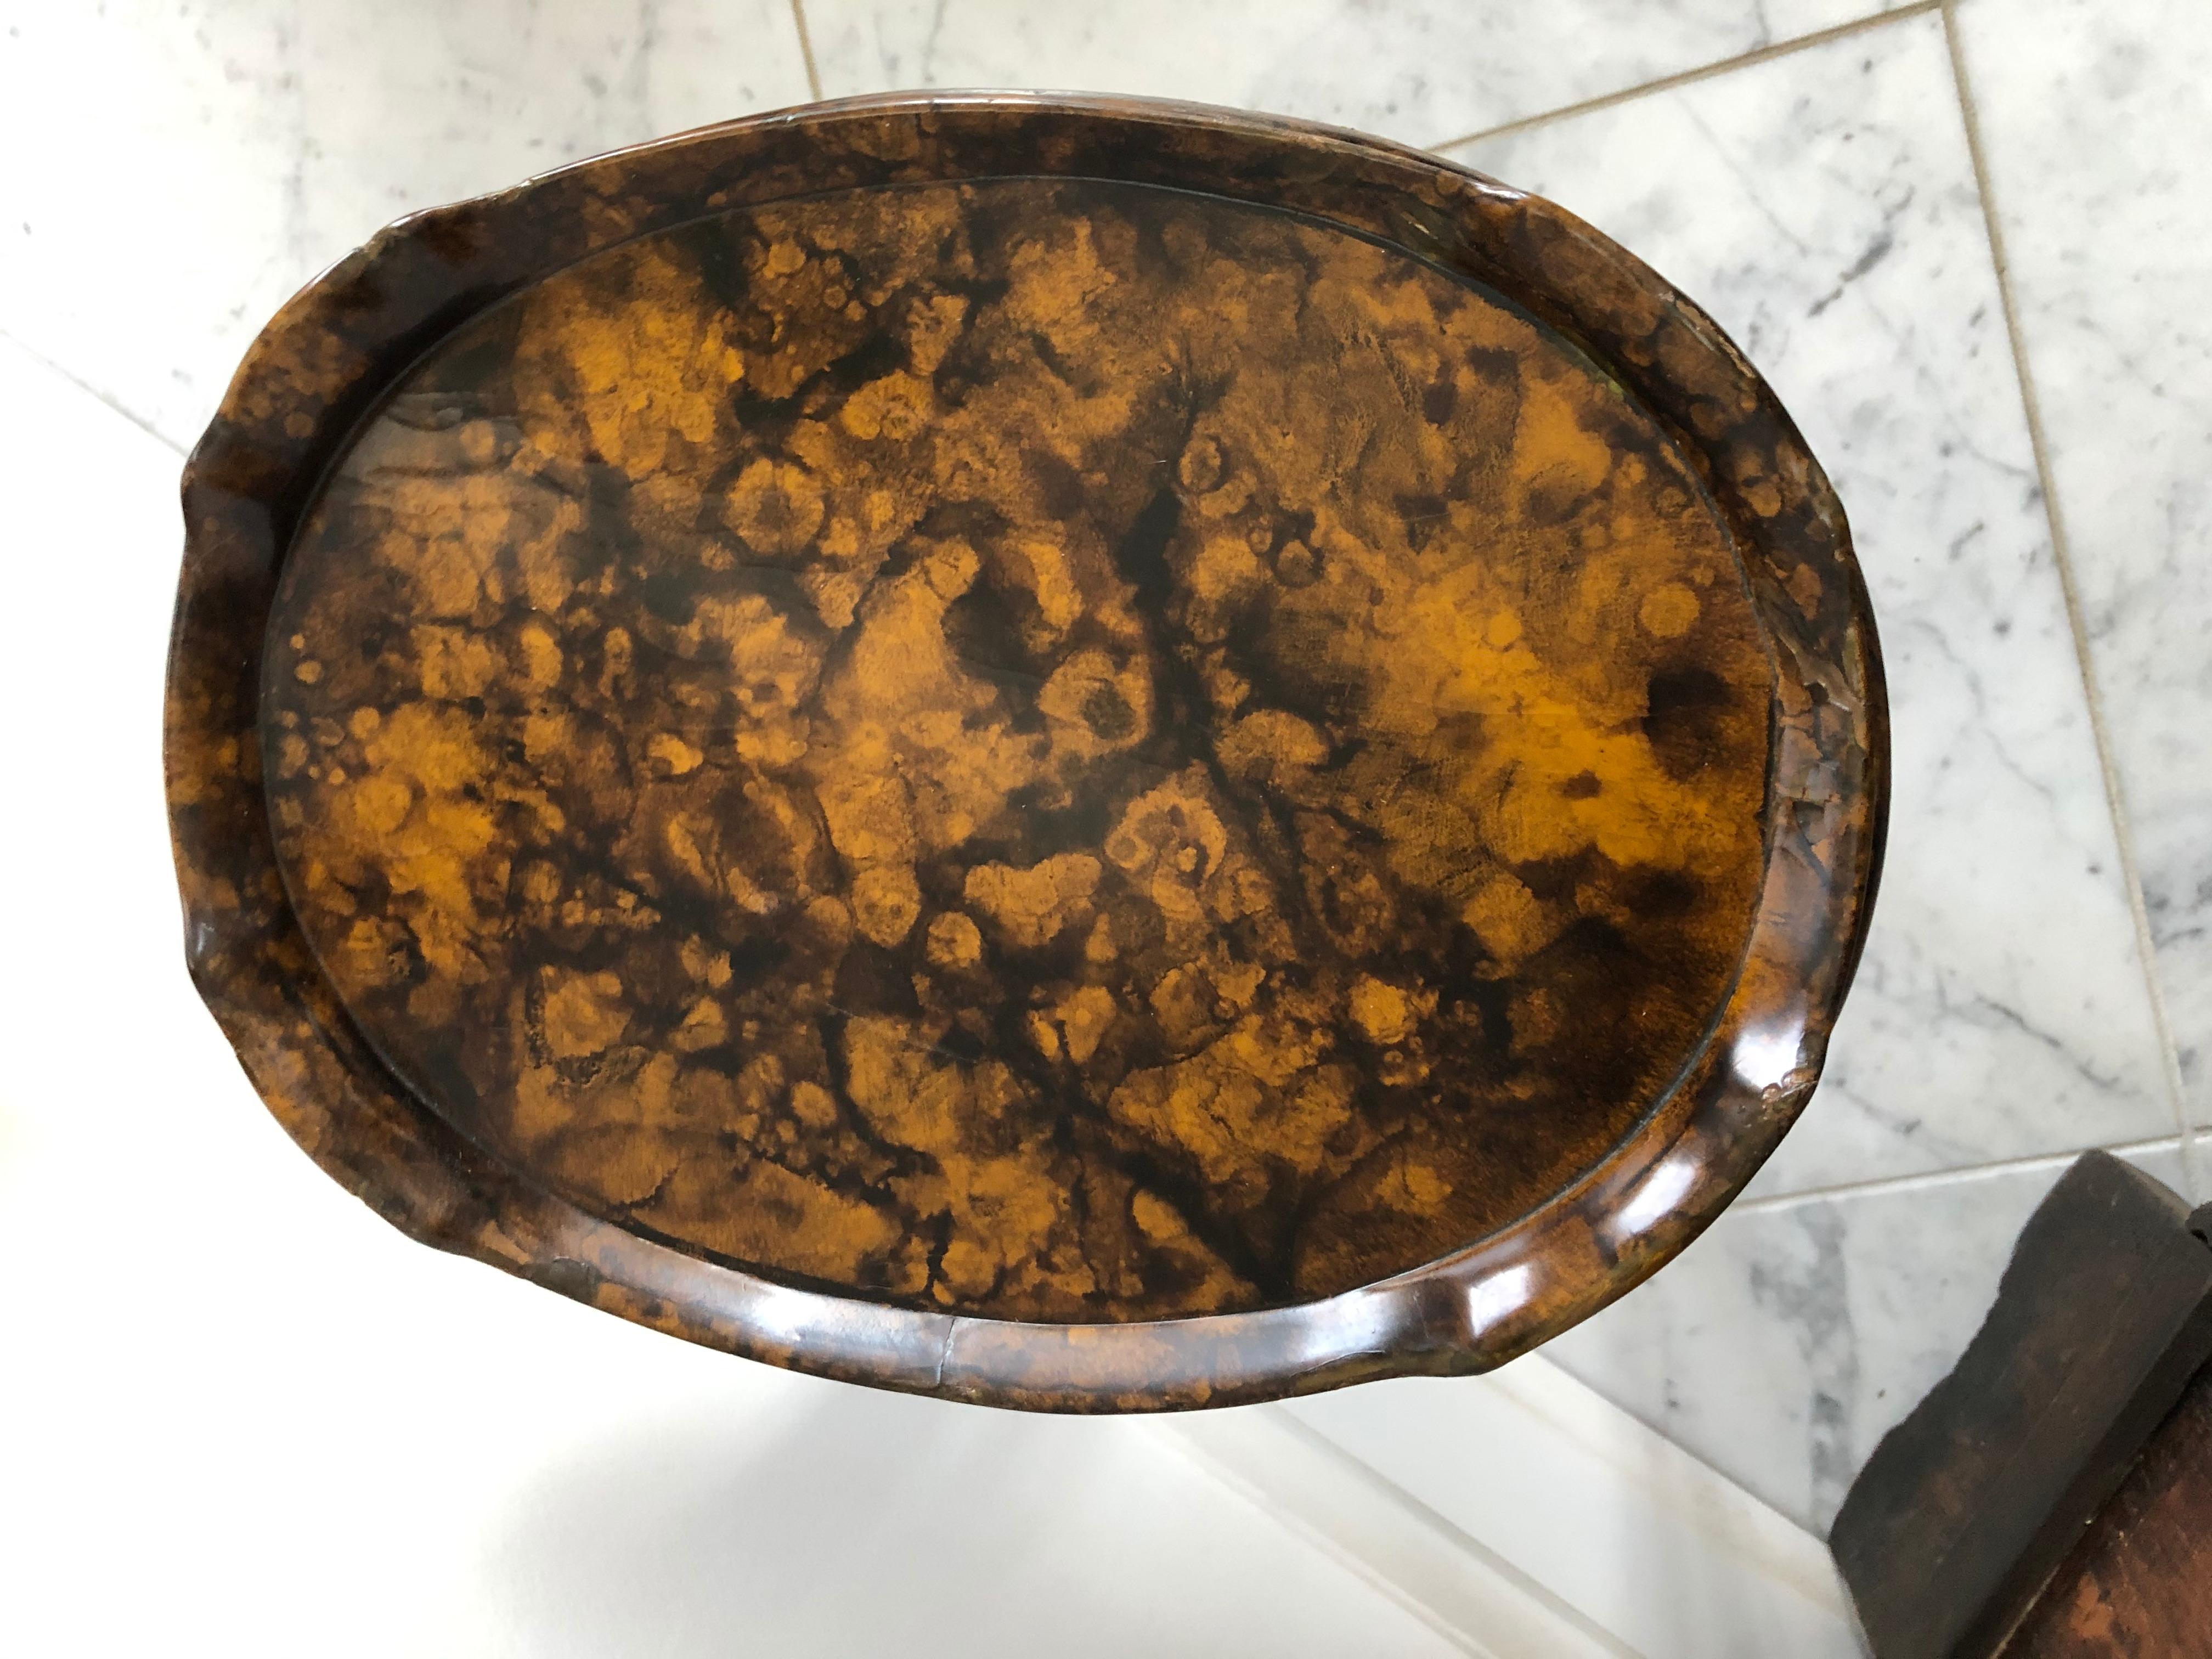 A jewel of a drinks table in a tortoise shell finish. The table has great patina and is the perfect size to place a martini.